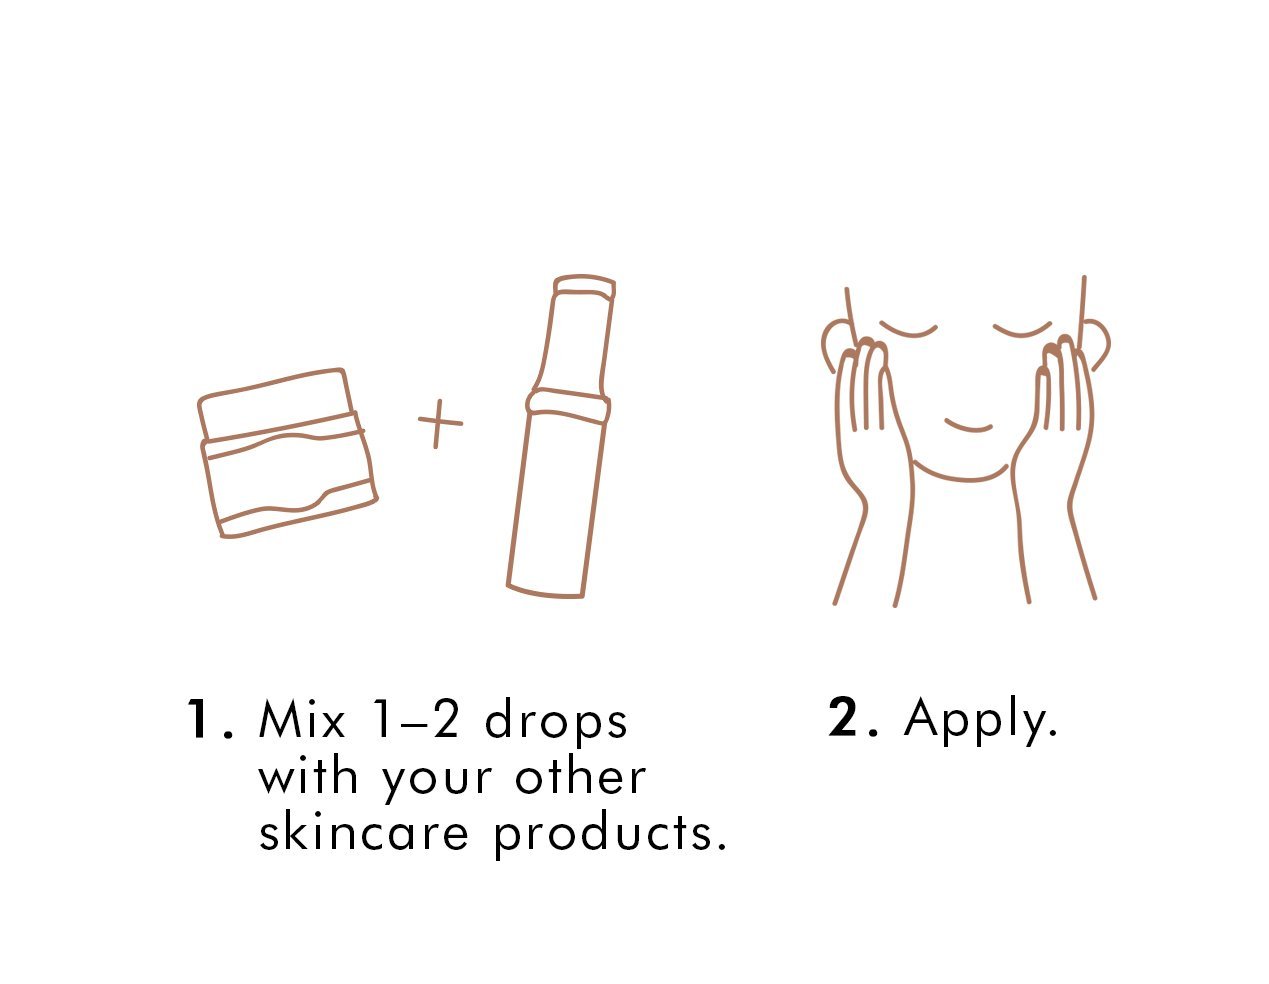 mix 1-2 drops with your other skin care products and apply